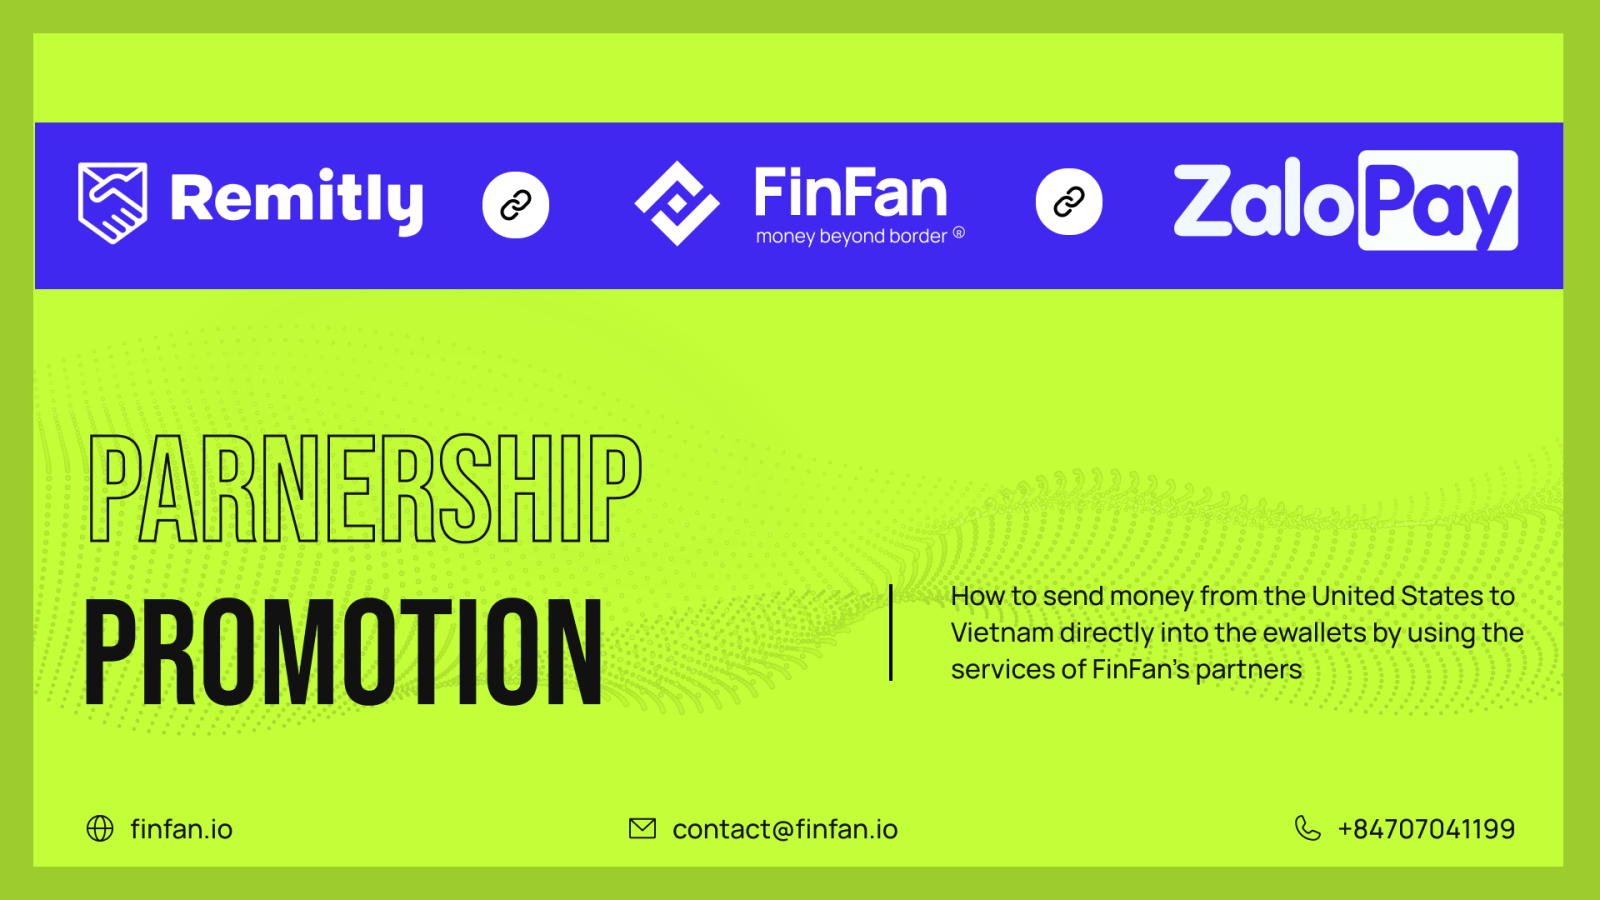 How to send money from the United States to Vietnam directly into the ewallets by using the services of FinFan’s partners – Remitly and Zalo Pay